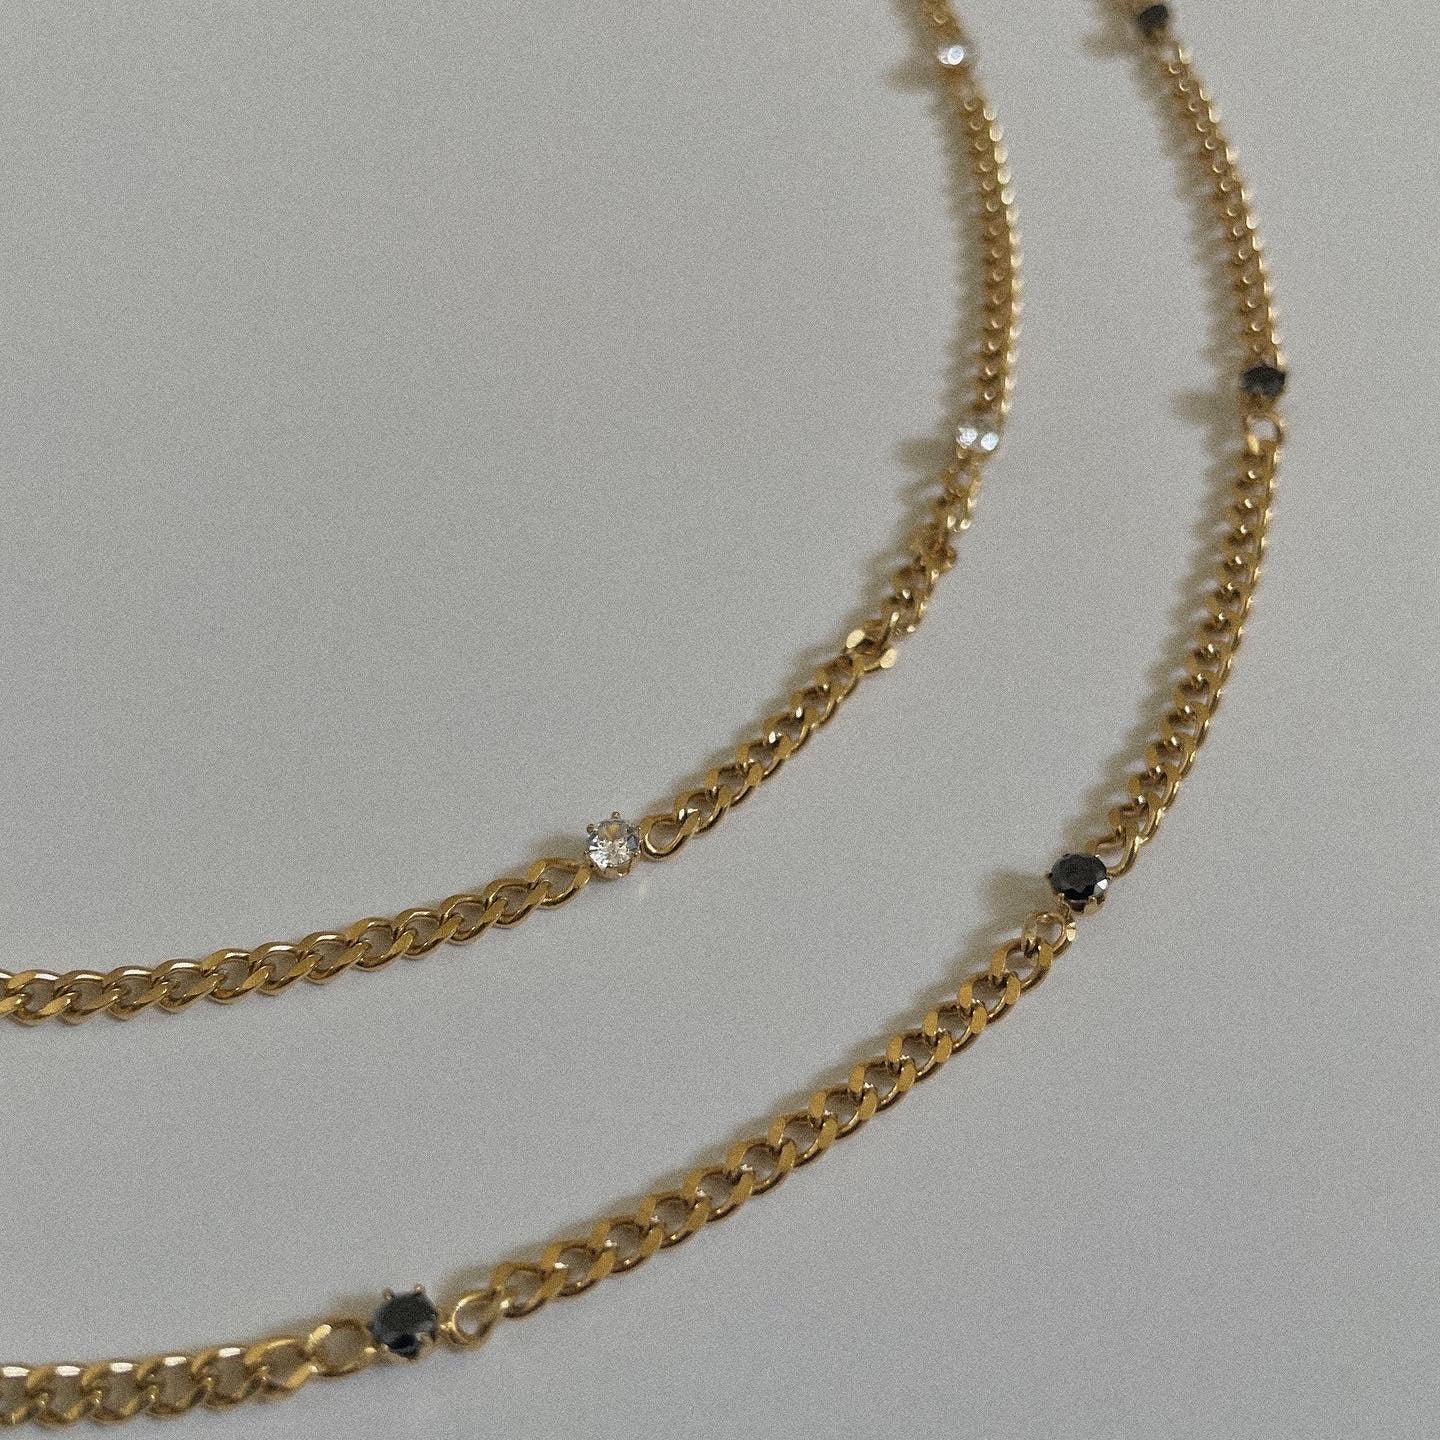 Cuban Link Chain Necklace with Crystals - The Smart Minimalist